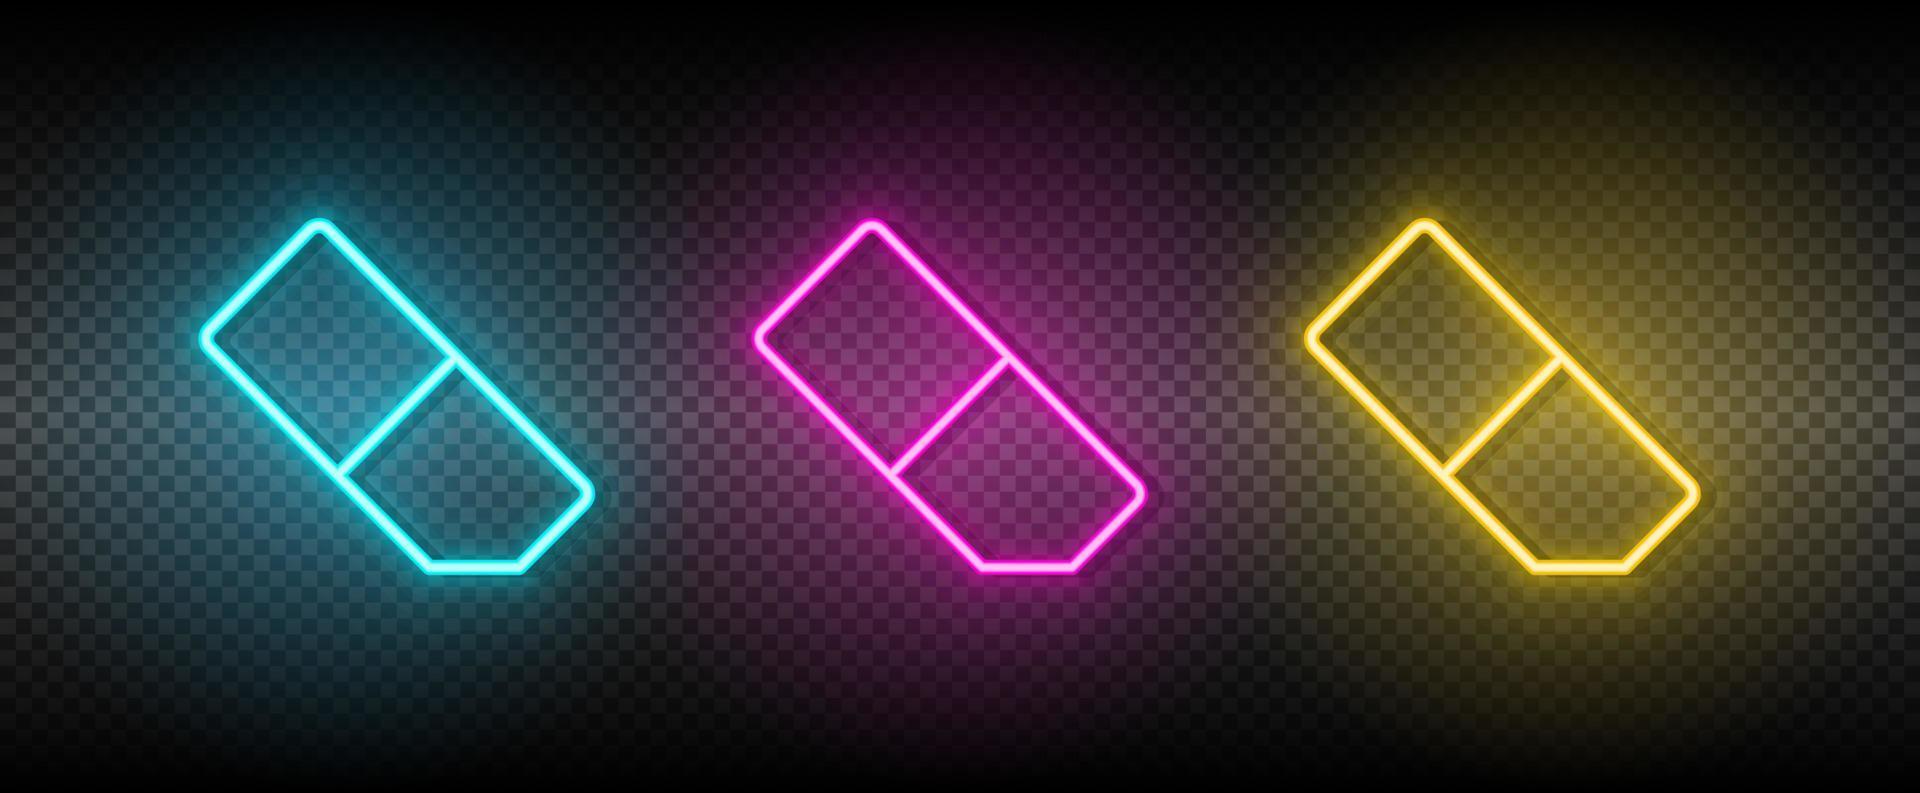 eraser vector icon yellow, pink, blue neon set. Tools vector icon on dark transparency background